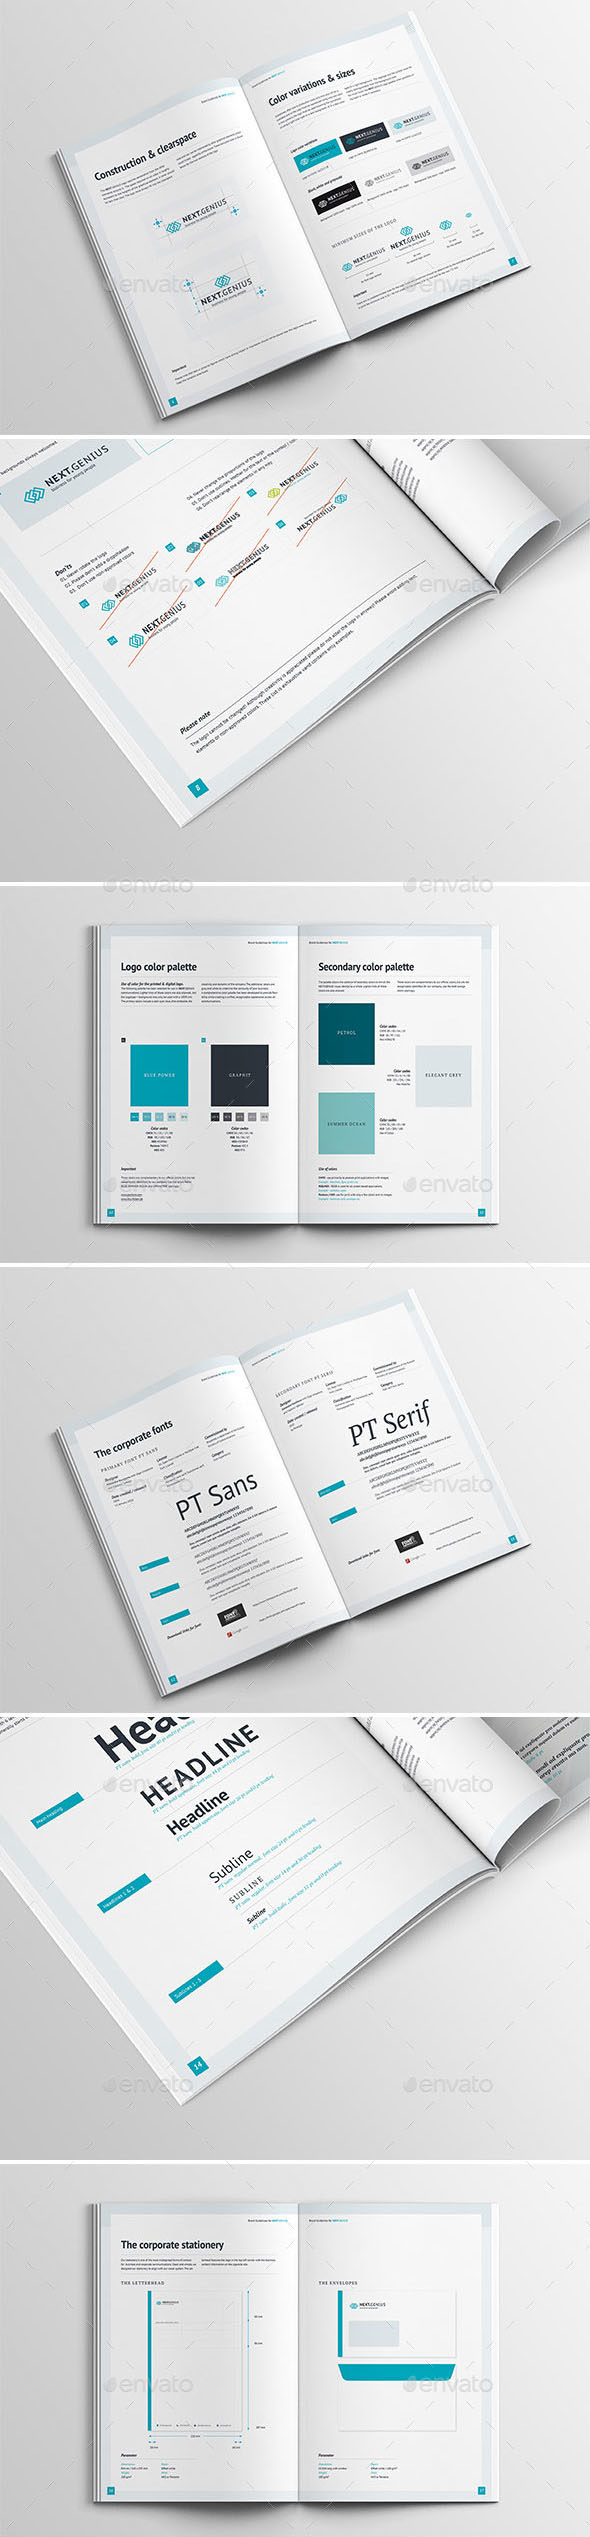 Brand Guidelines—32 Pages